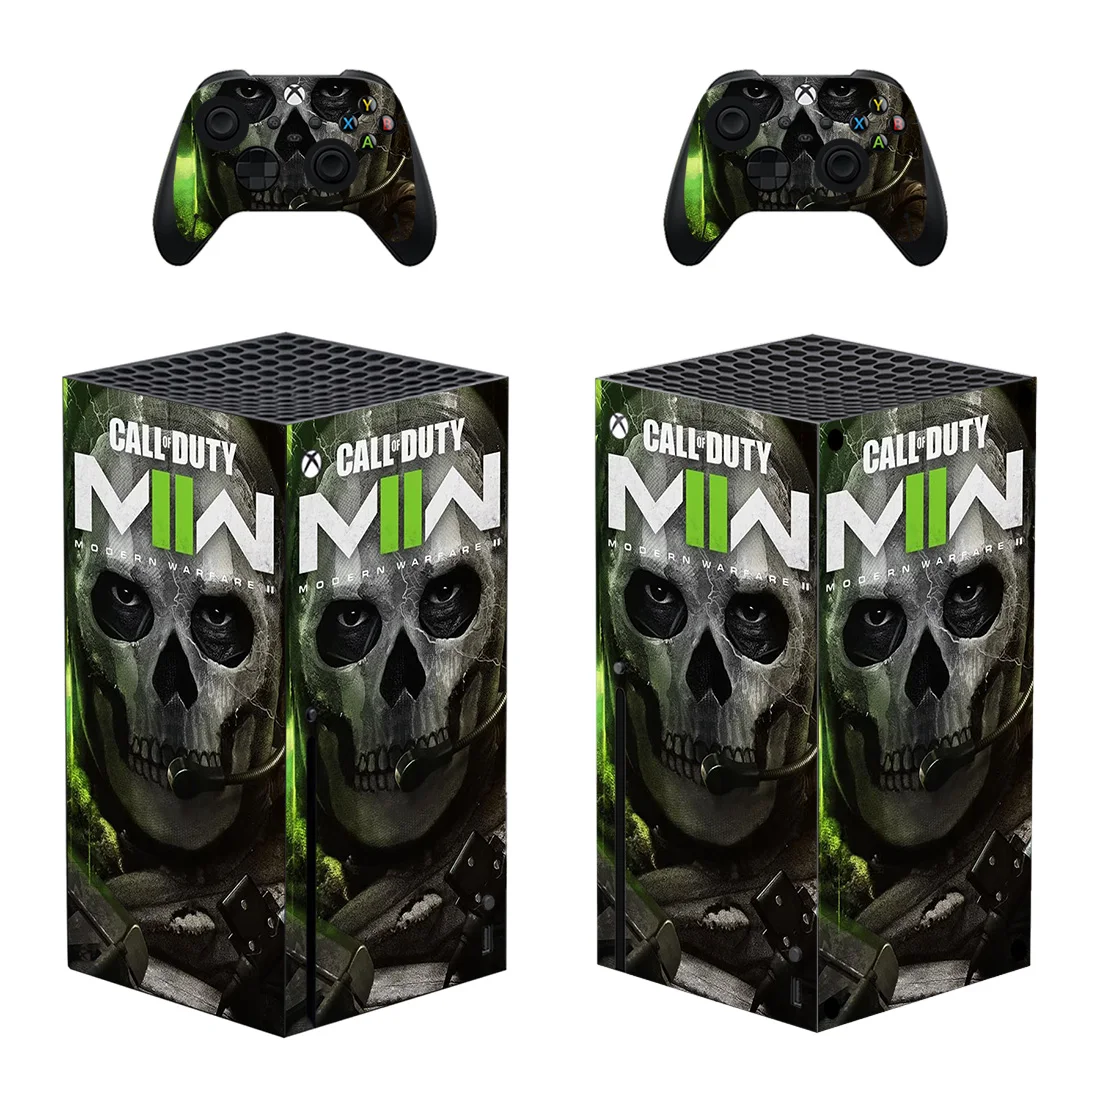 

Modern Warfare 2 Skin Sticker Decal Cover for Xbox Series X Console and 2 Controllers XSX Skin Sticker Vinyl